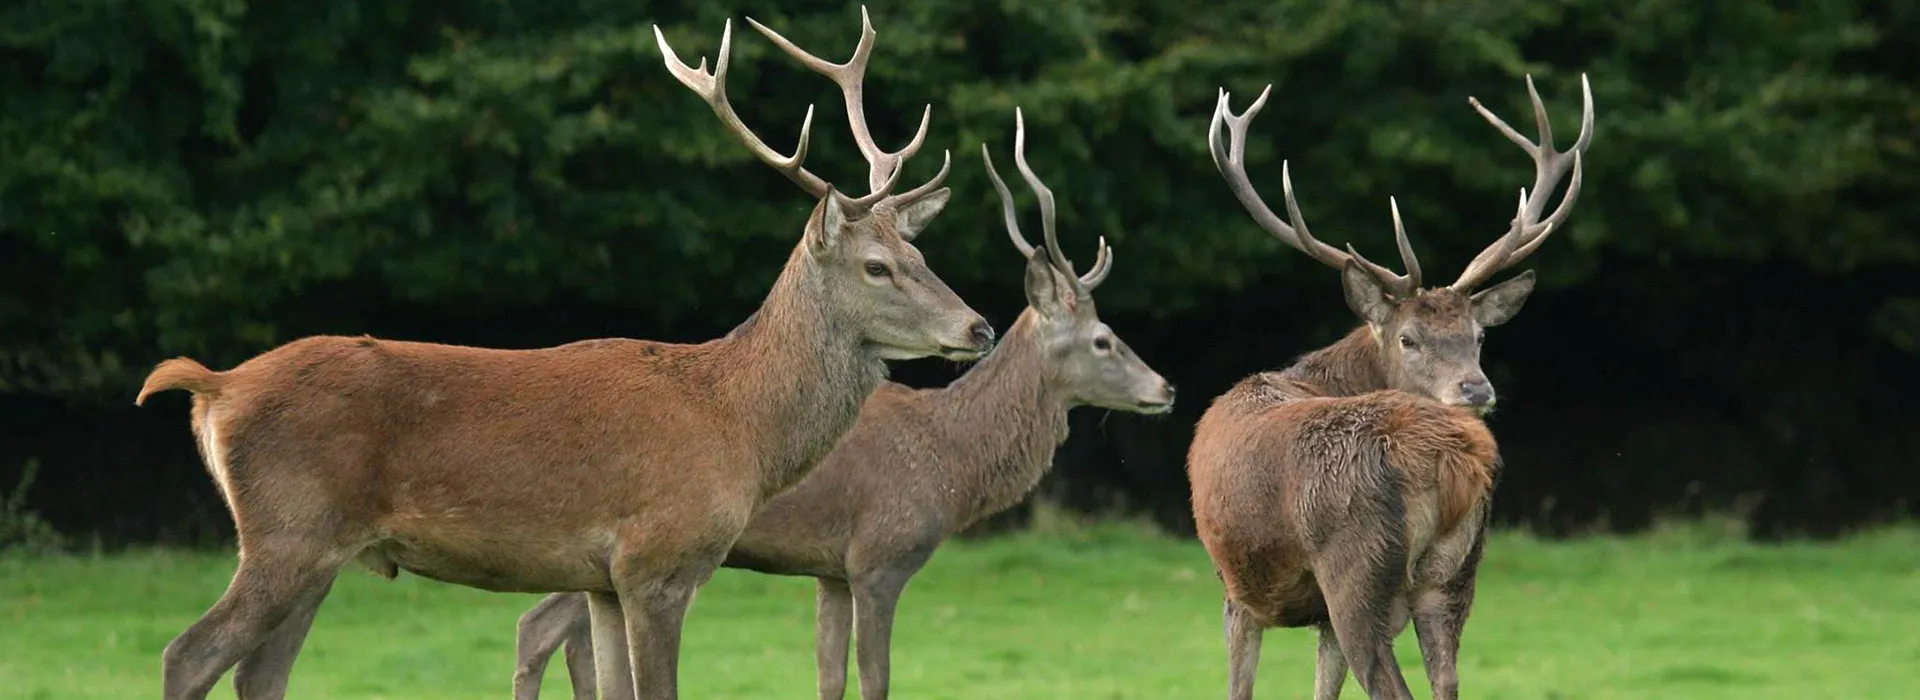 Deer Hunting - Stags are hunting by three hunts in south west England